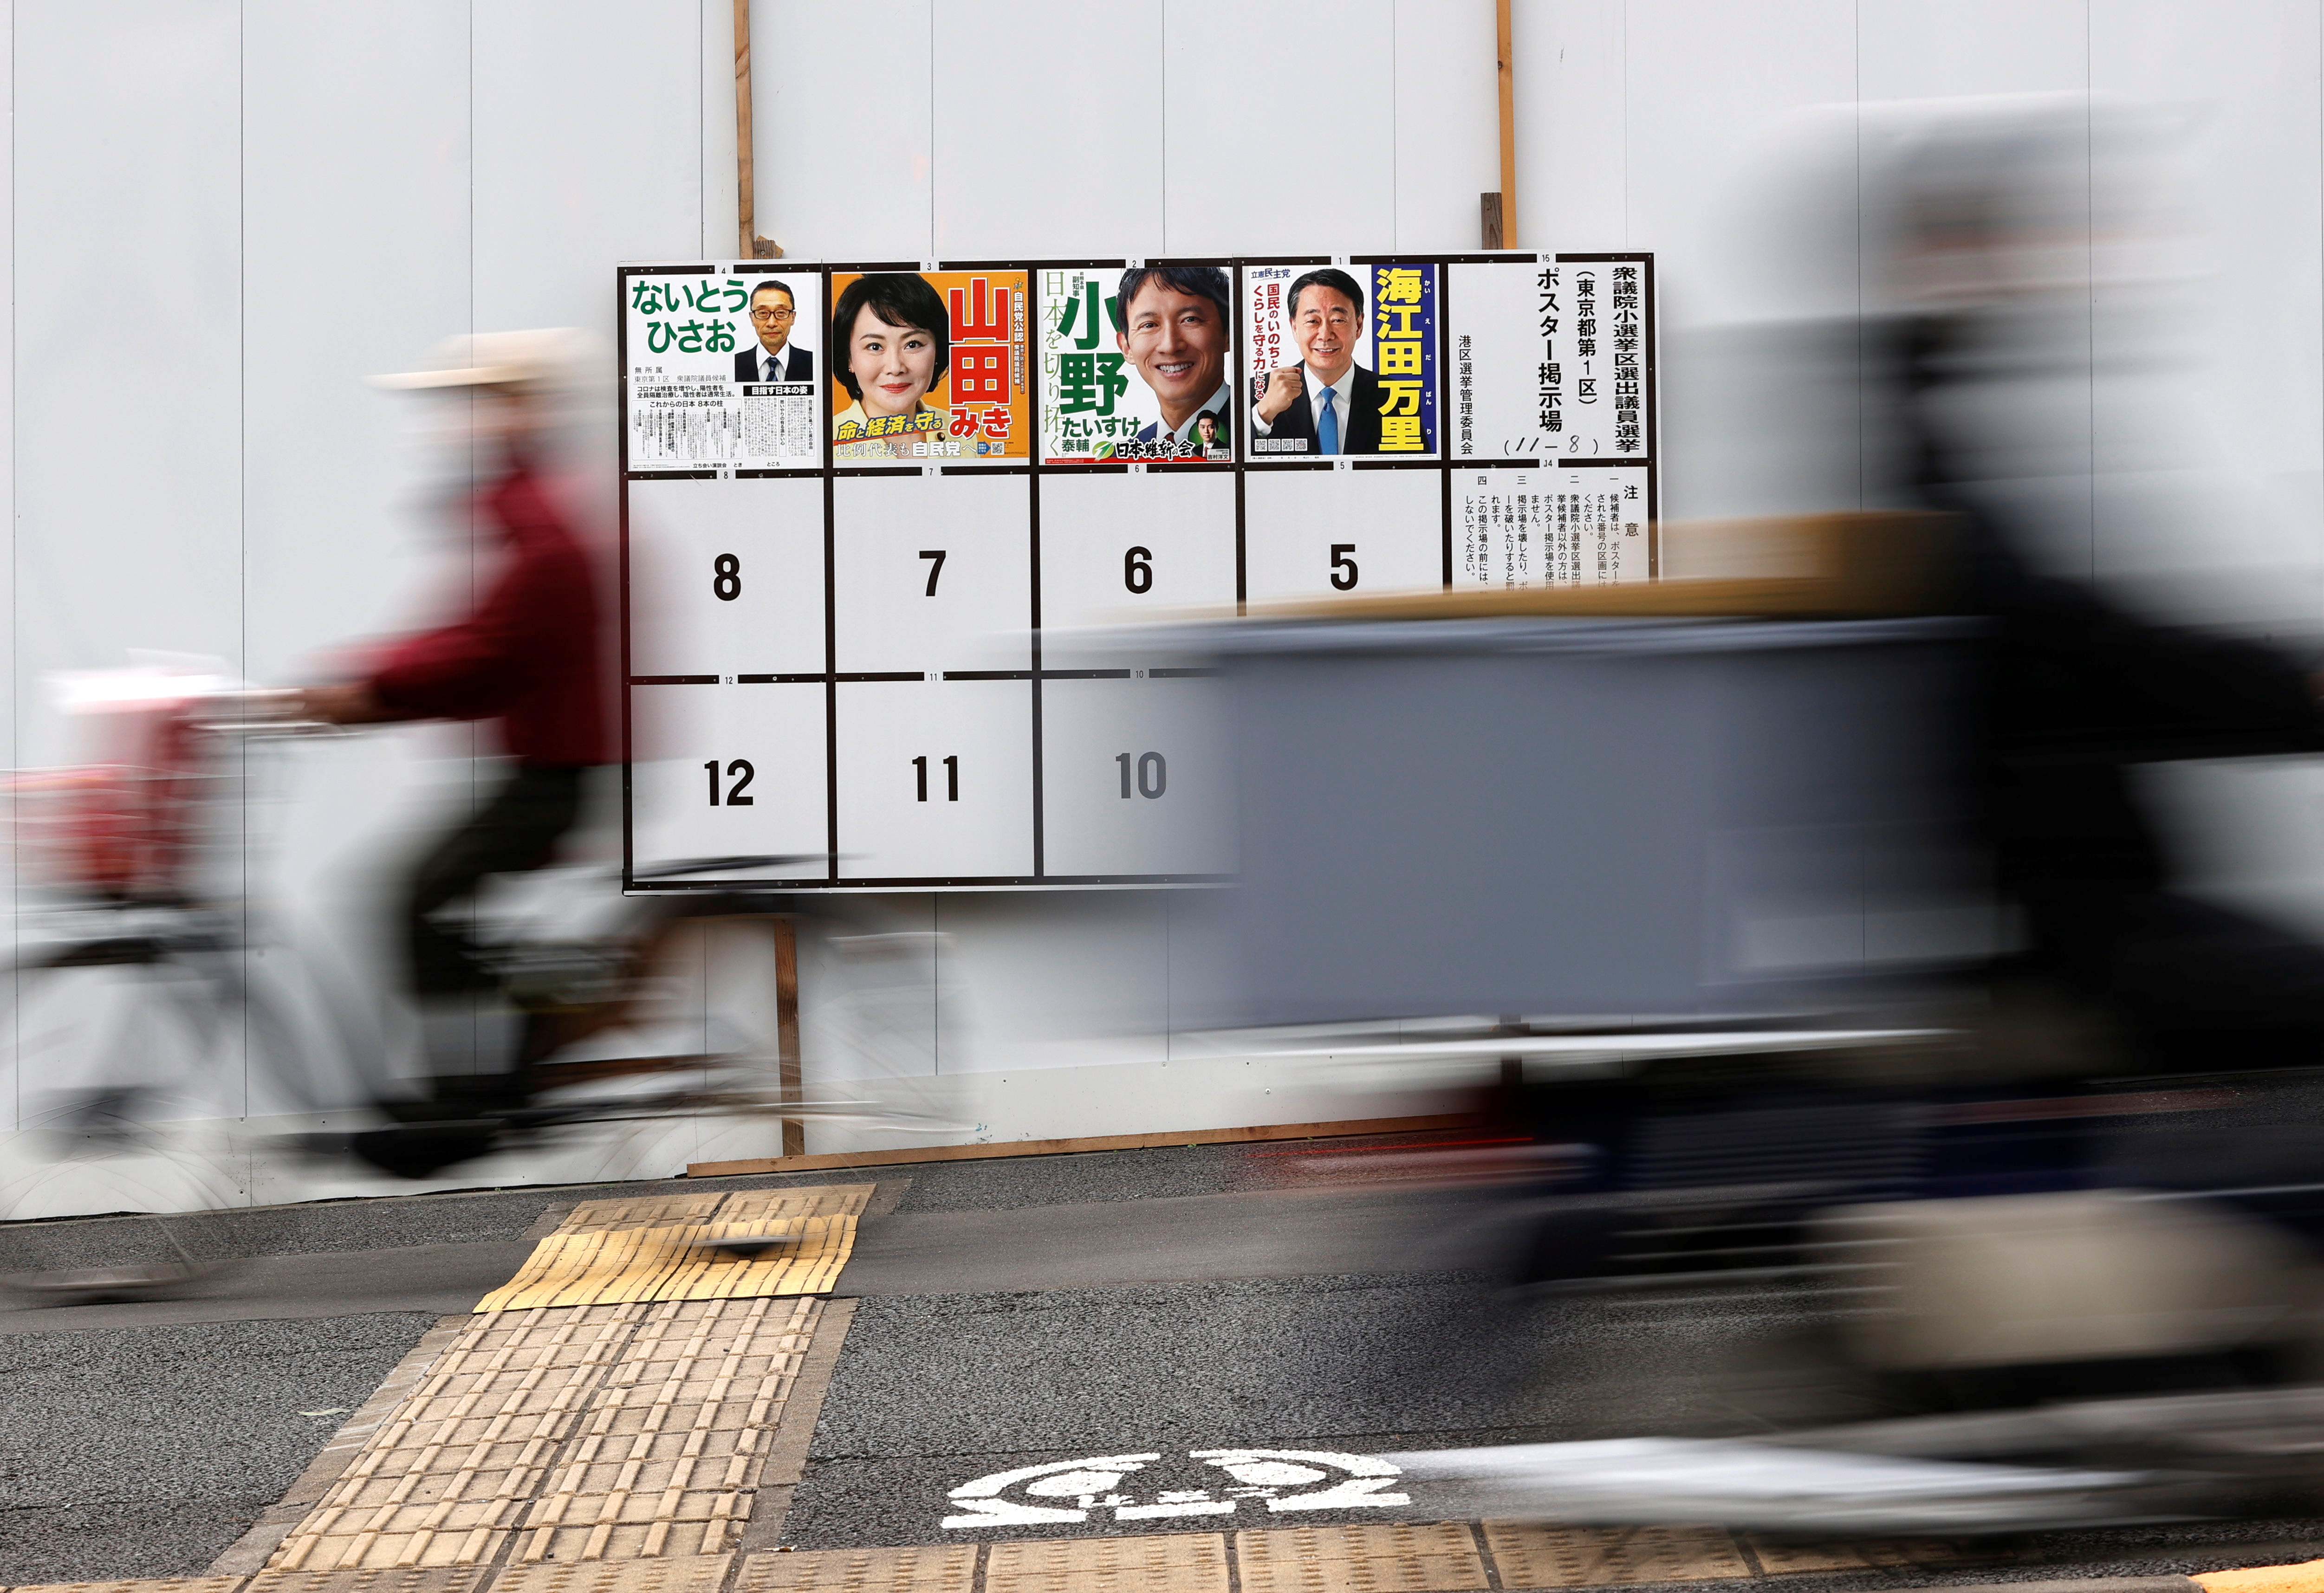 Posters of candidates for a lower house election are displayed outside a polling station, amid the coronavirus disease (COVID-19) pandemic, in Tokyo